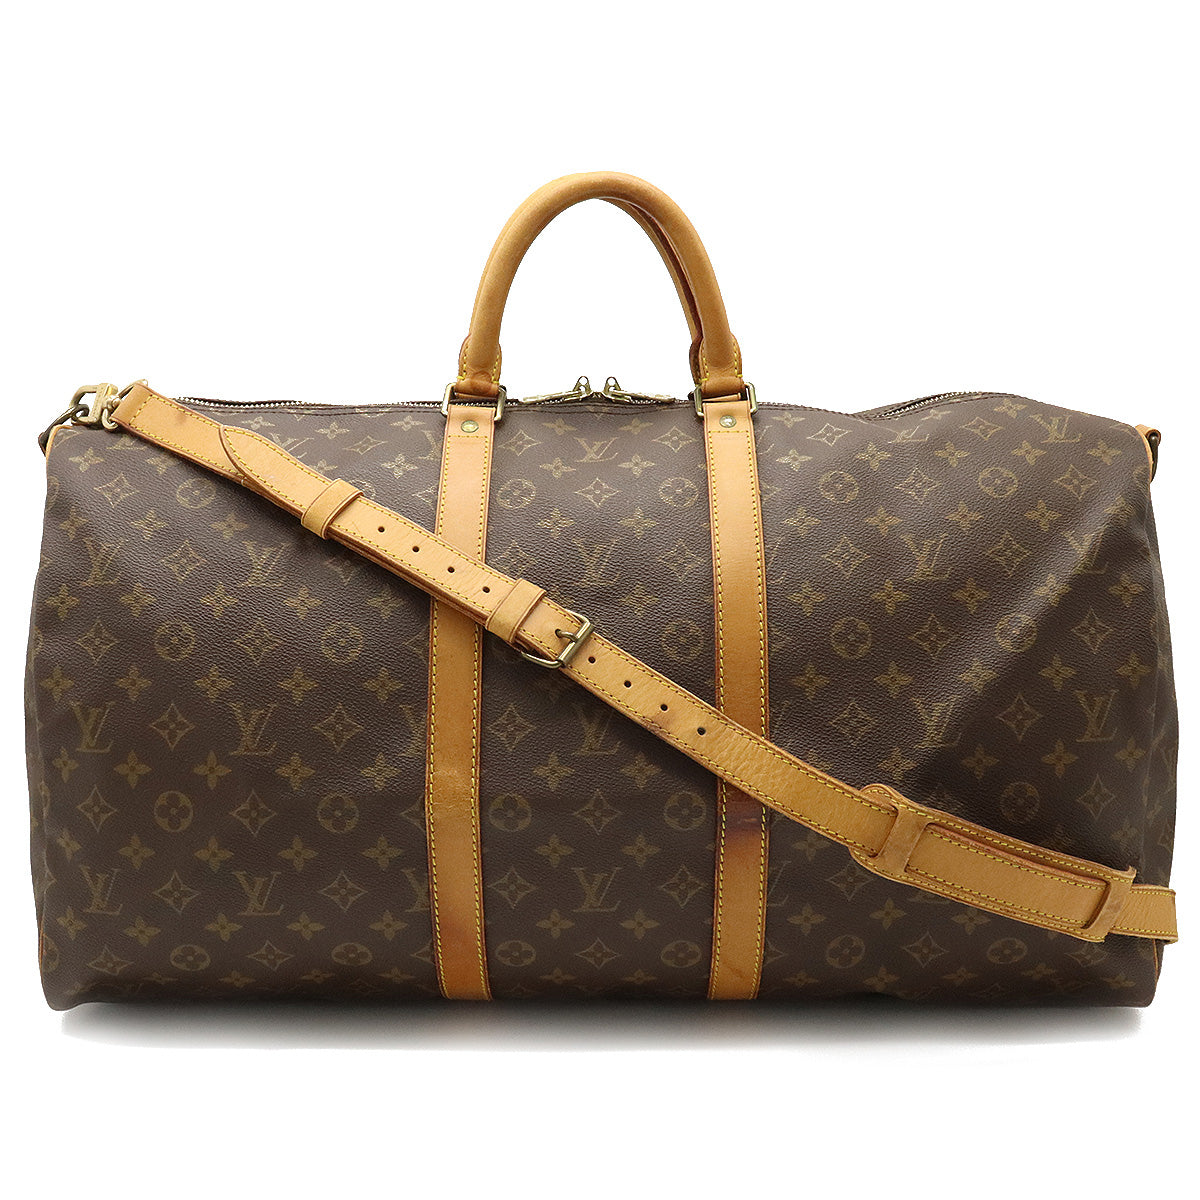 Louis Vuitton, Bags, Authentic Louis Vuitton Keepall 45 Bandouliere My  Heritage Duffle Bag